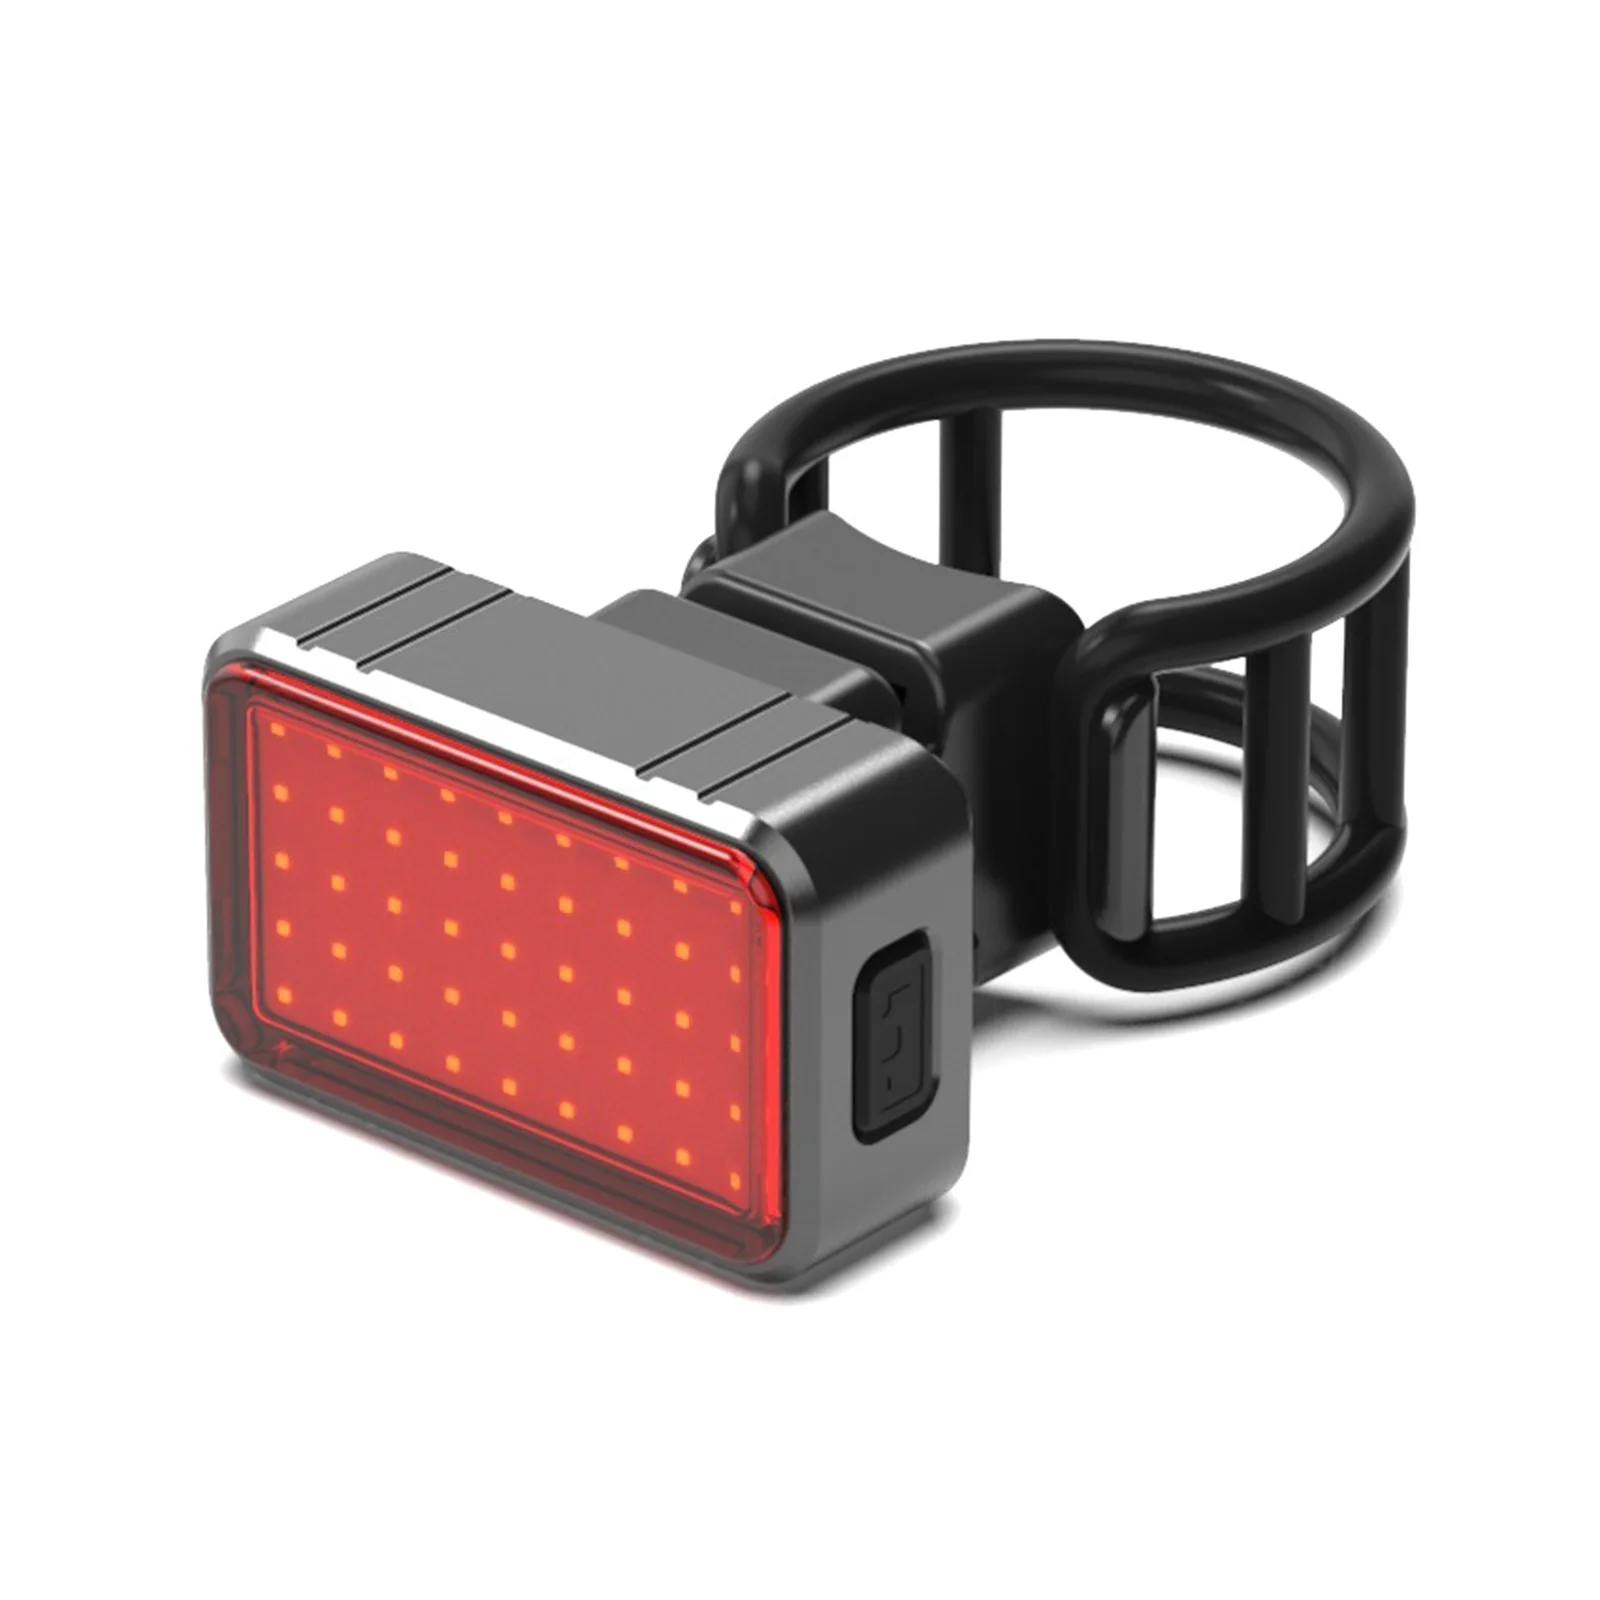 

USB Rechargeable LED Bike Flash Tail Rear Light Bicycle Taillight Cycling Seatpost Waterproof 100LM COB 28LED Lighting Tool